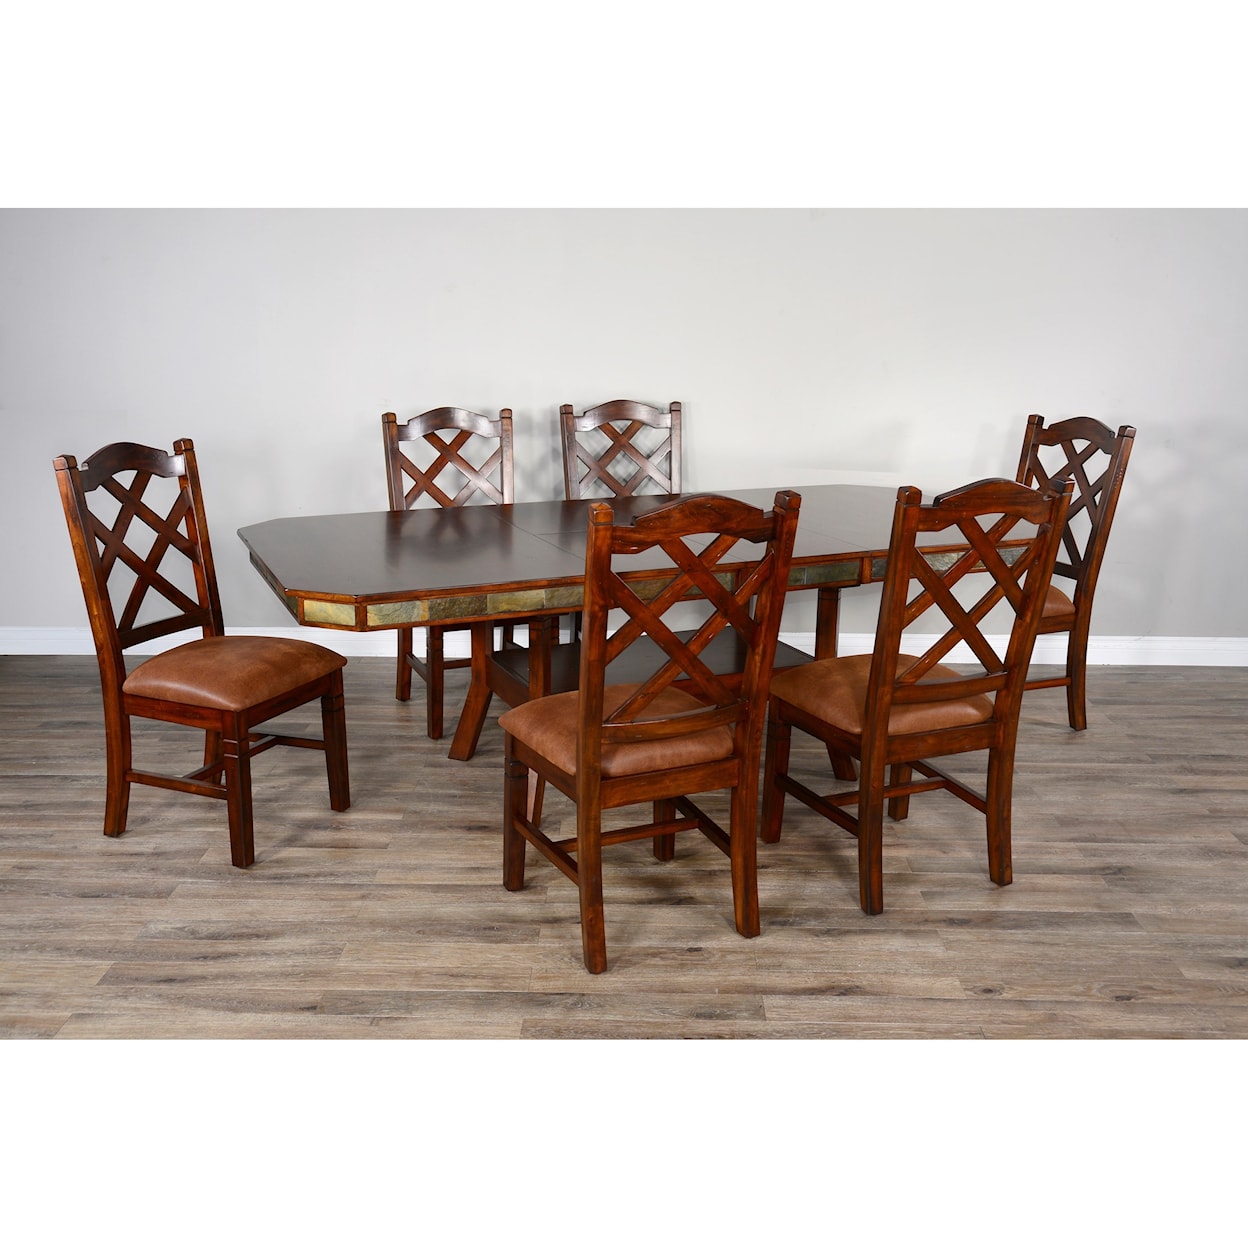 Sunny Designs Santa Fe Dining Set with 6 Side Chairs